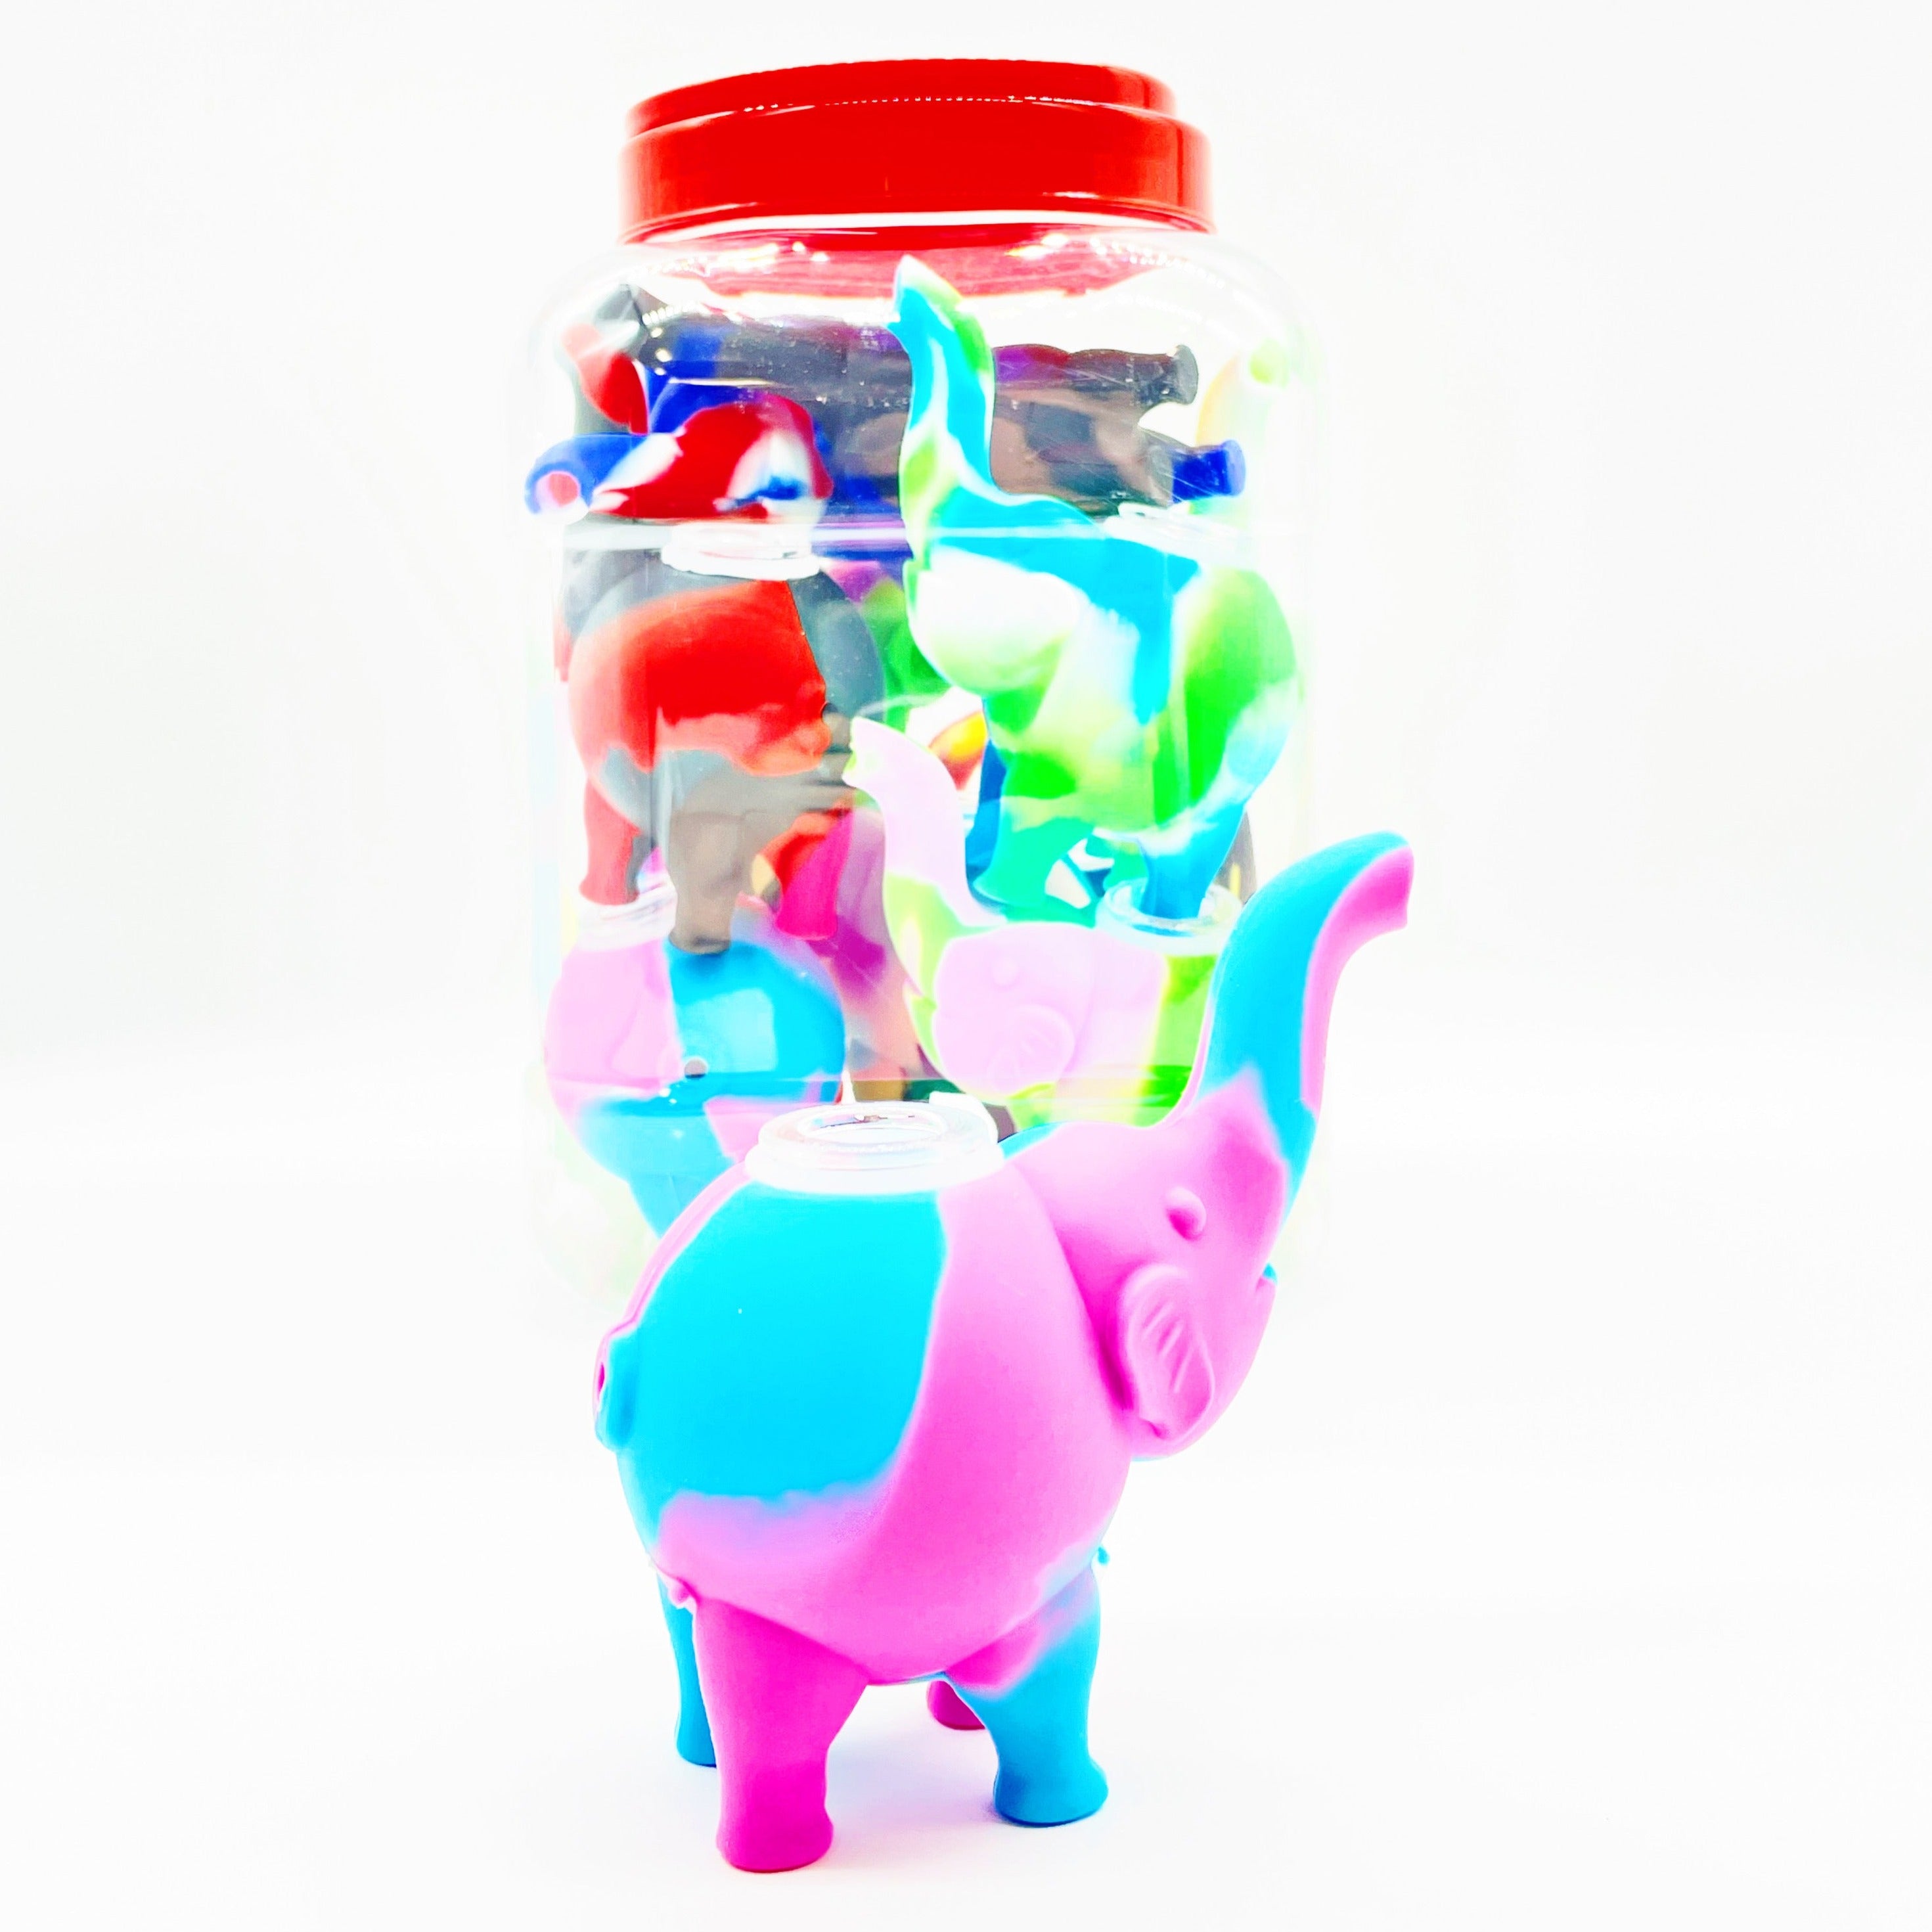 Assorted Colored Elephant Silicone Pipes with Glass Bowls Wholesale - 1 Jar / 12pcs